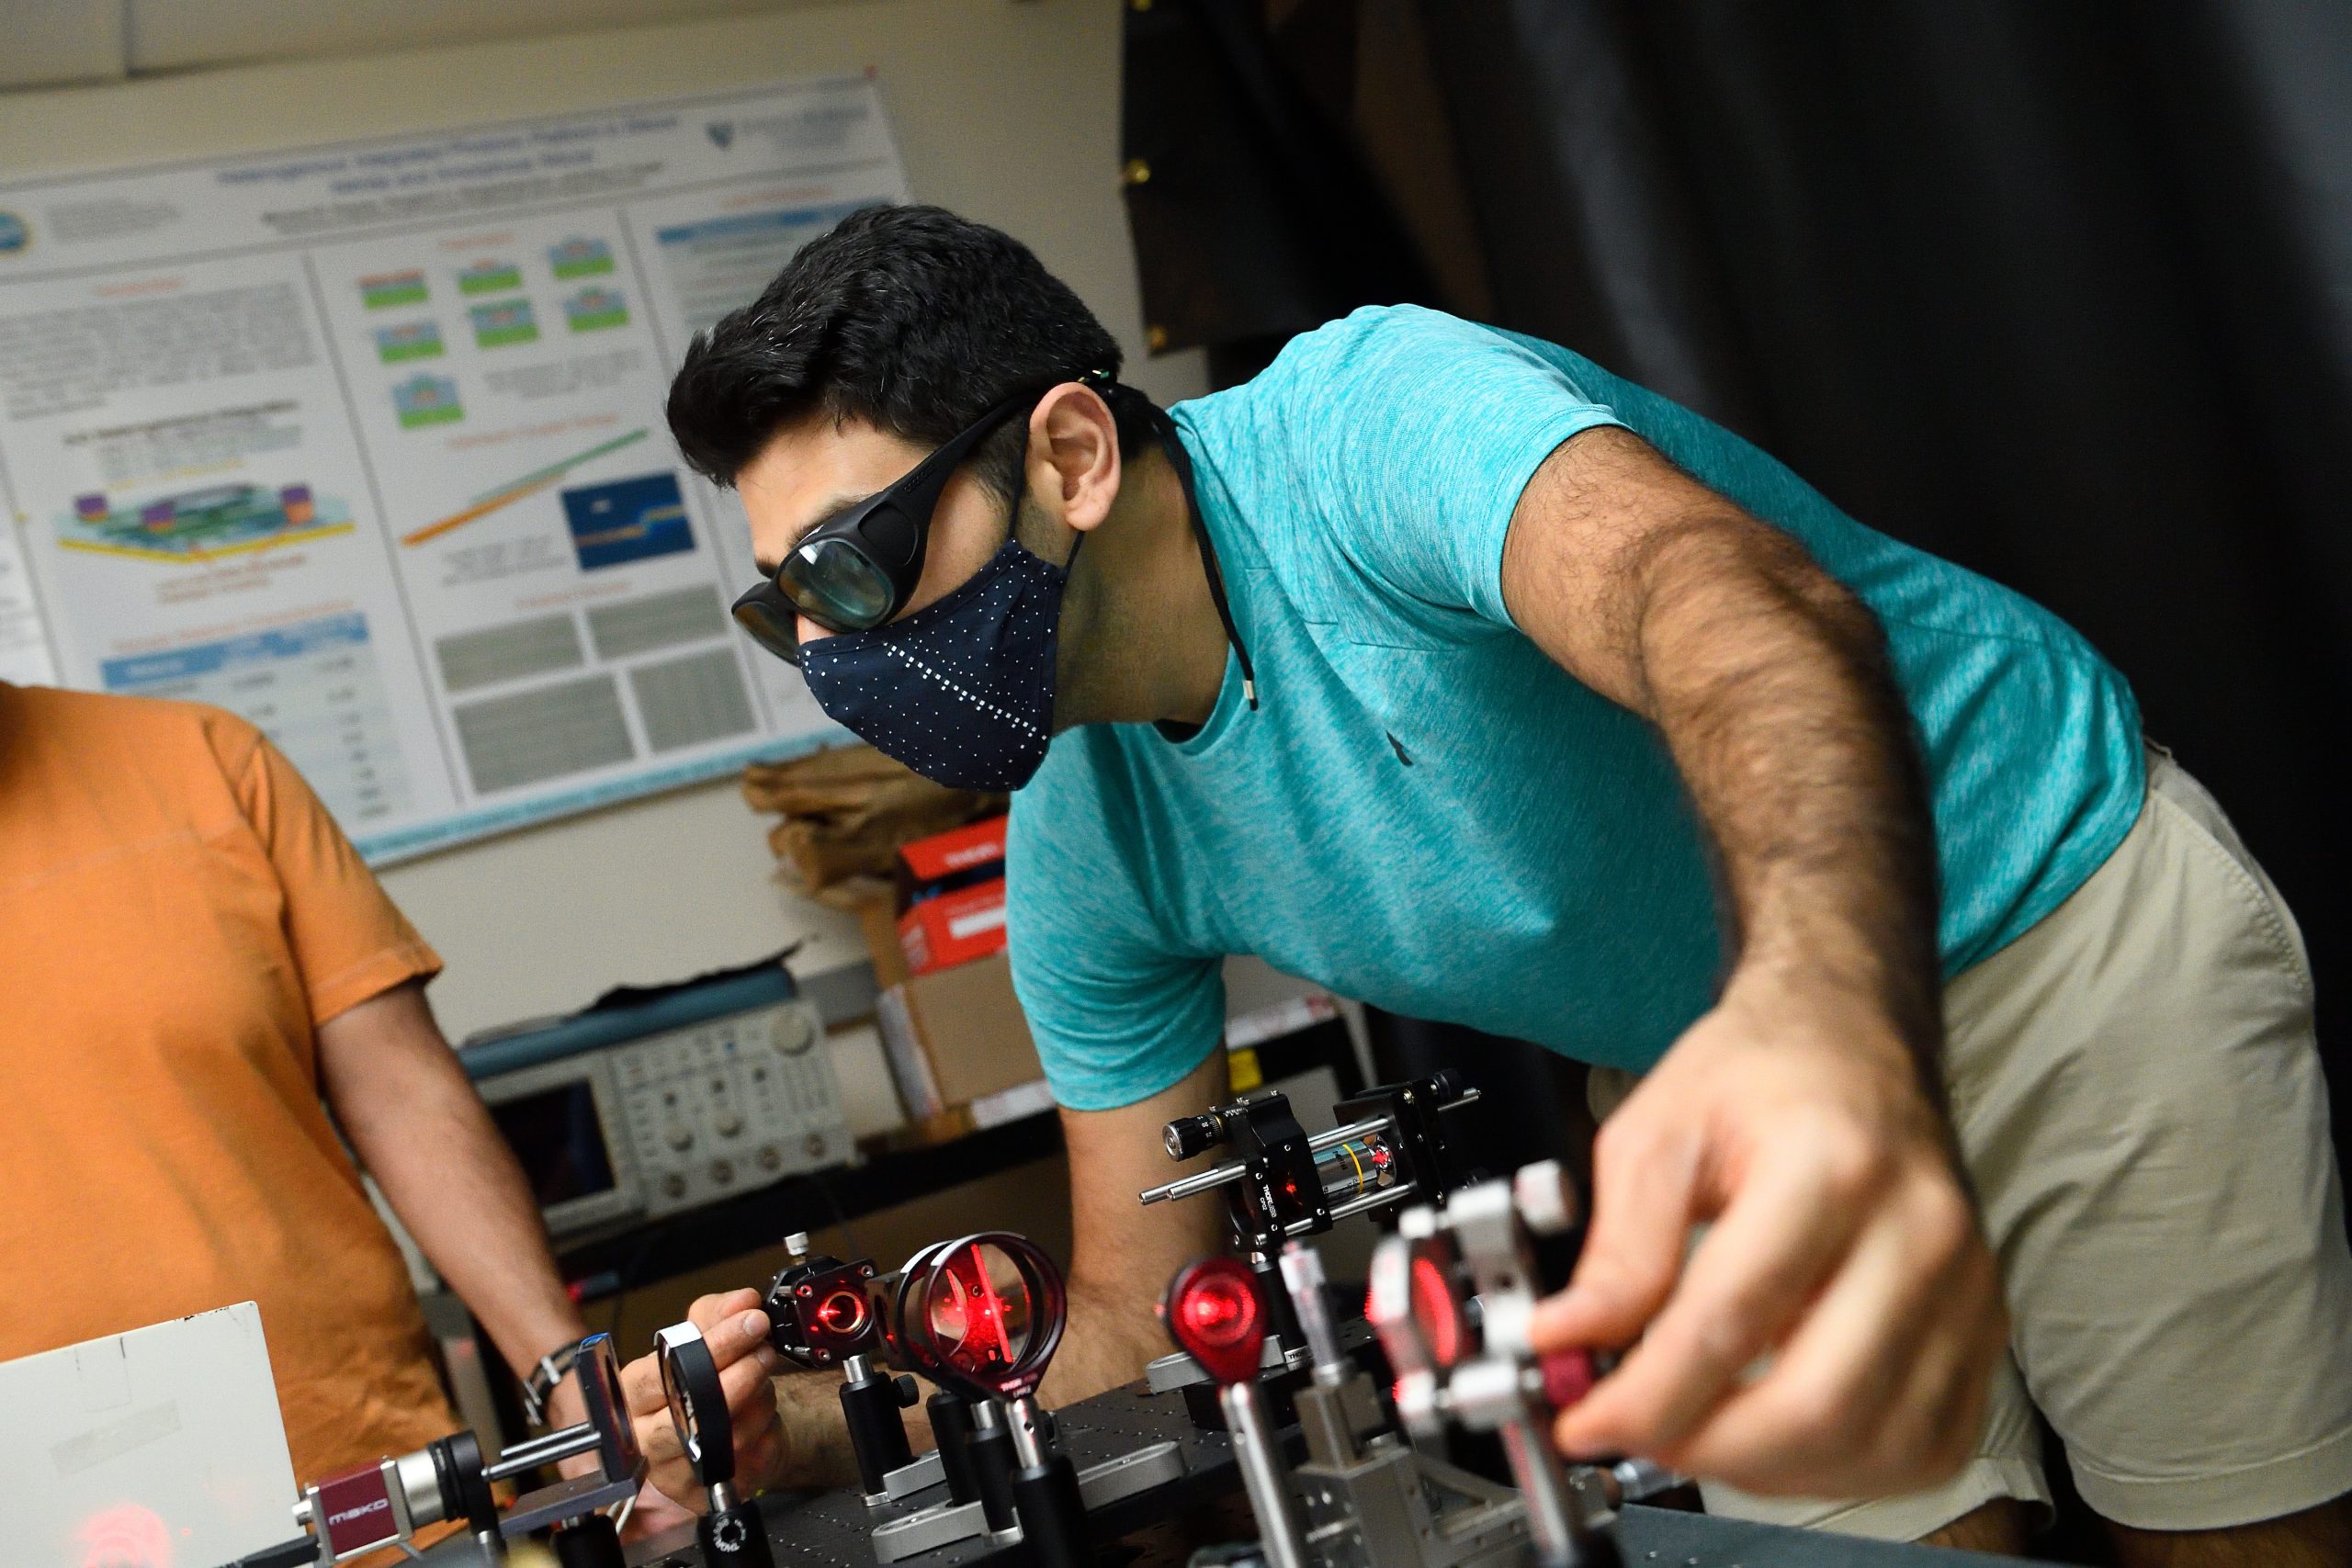 A male student wears goggles and a face mask while adjusting a piece of equipment.